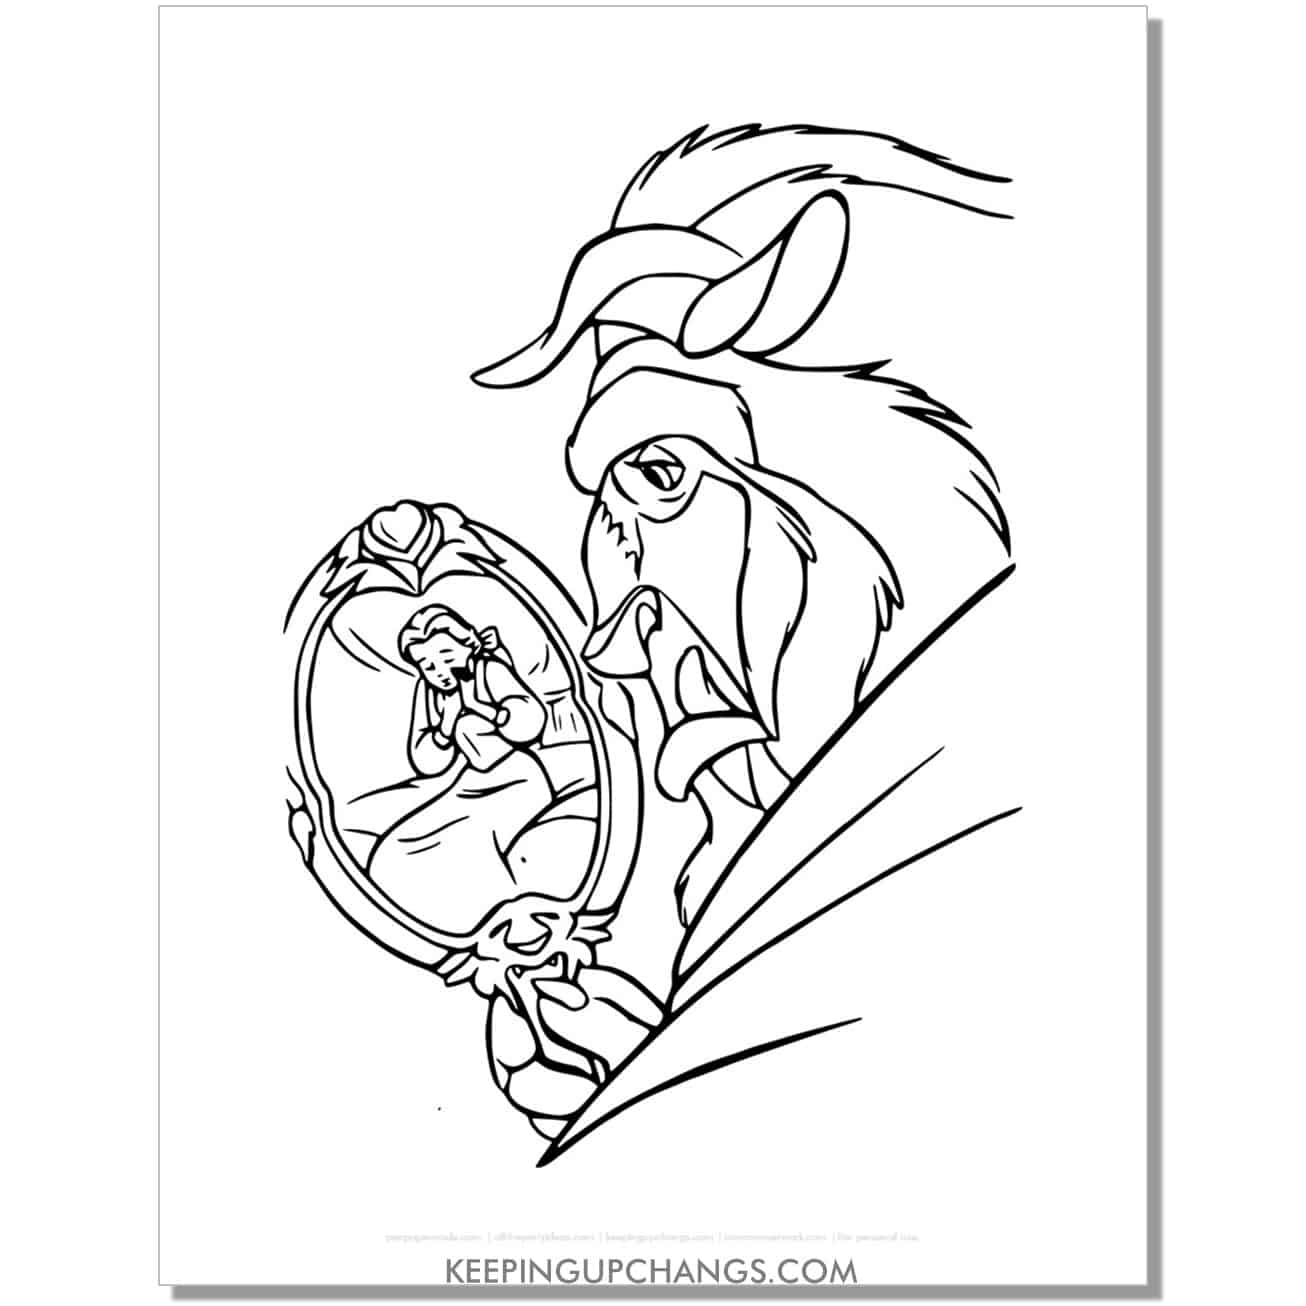 beast sees belle in enchanted mirror coloring page, sheet.